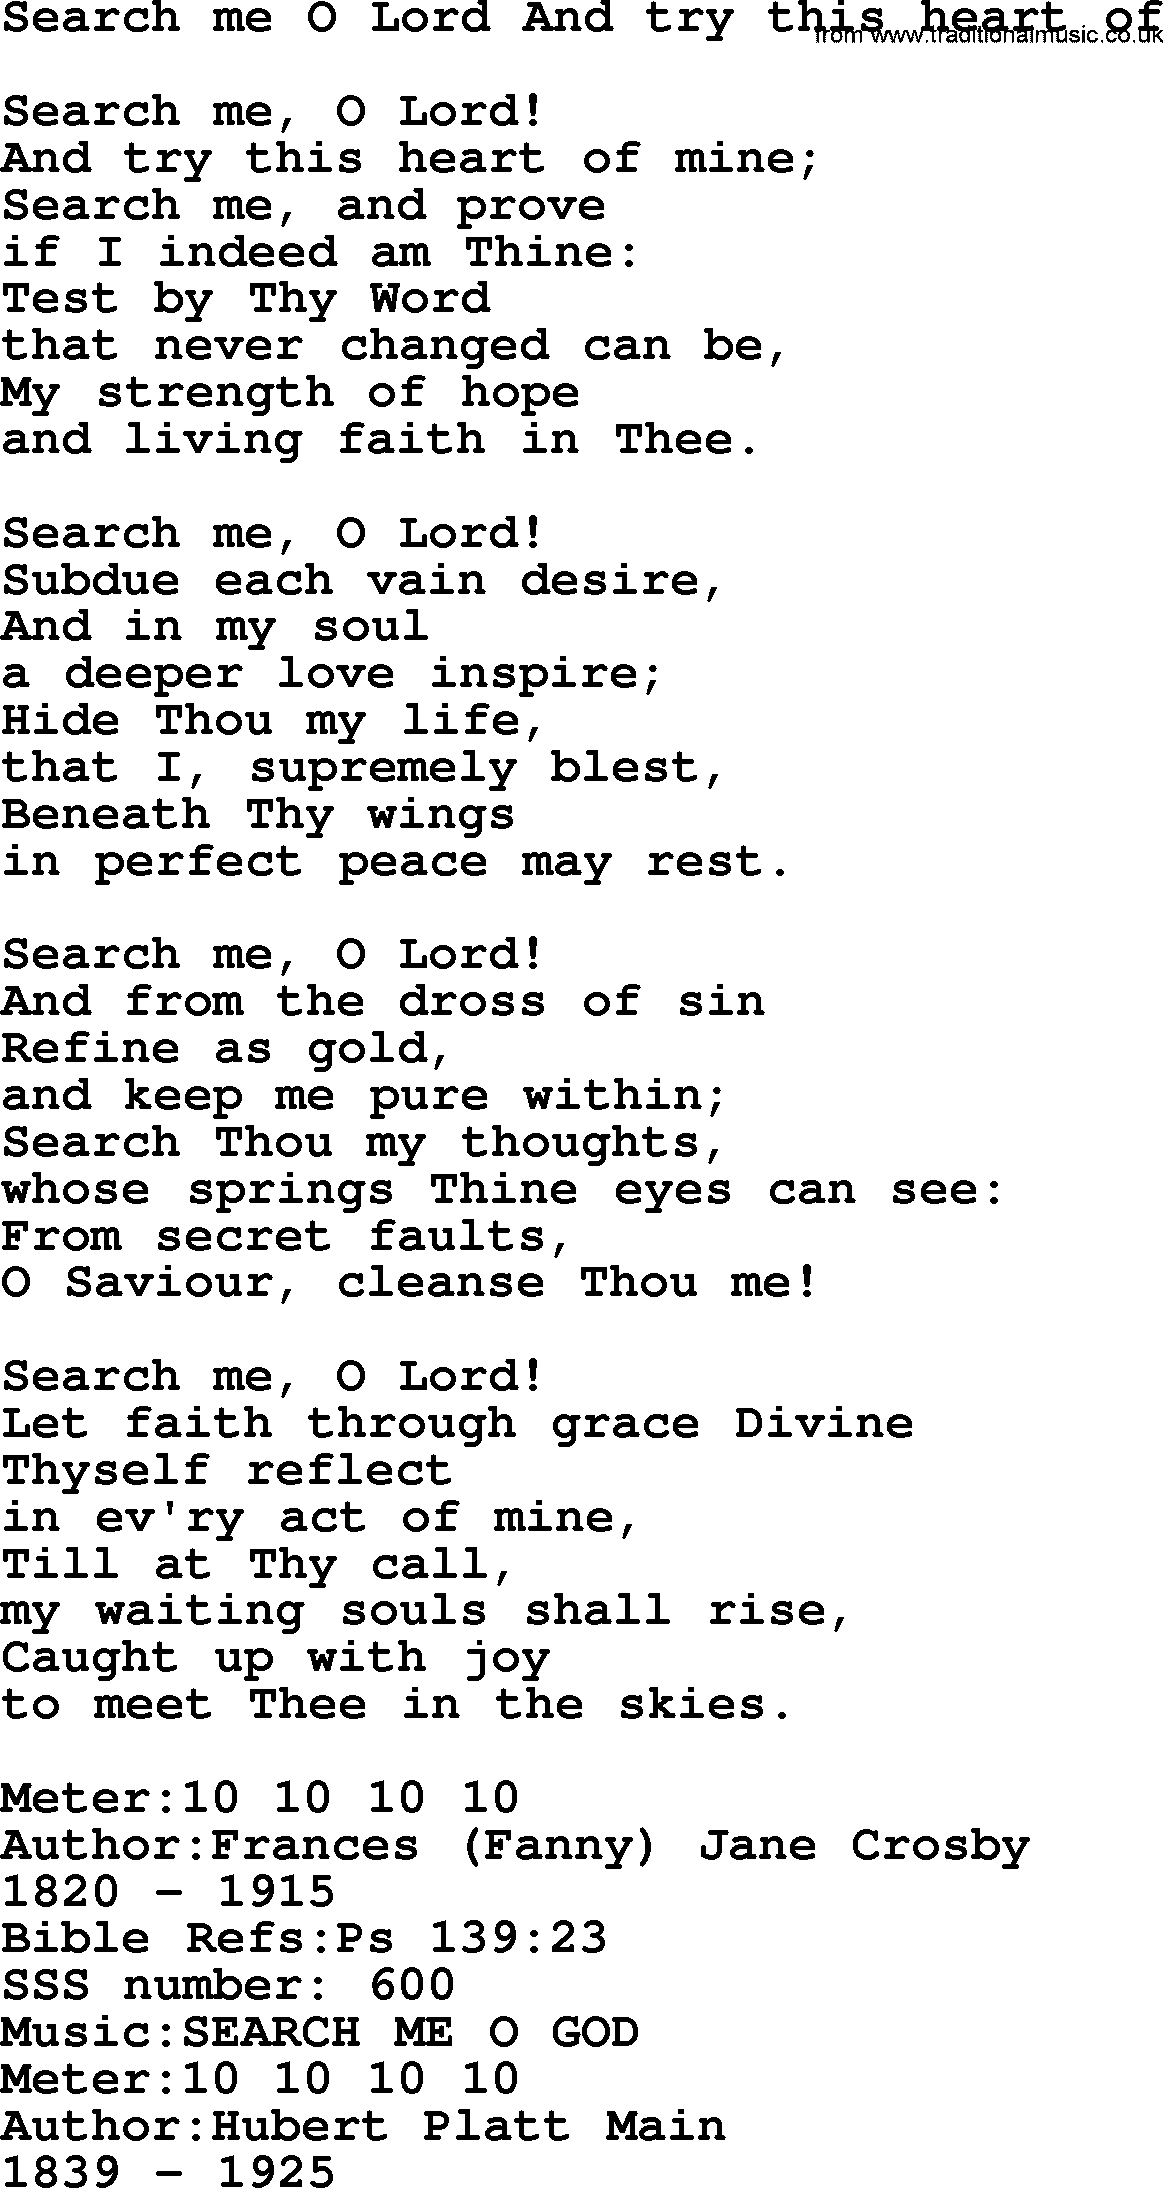 Sacred Songs and Solos complete, 1200 Hymns, title: Search Me O Lord And Try This Heart Of, lyrics and PDF